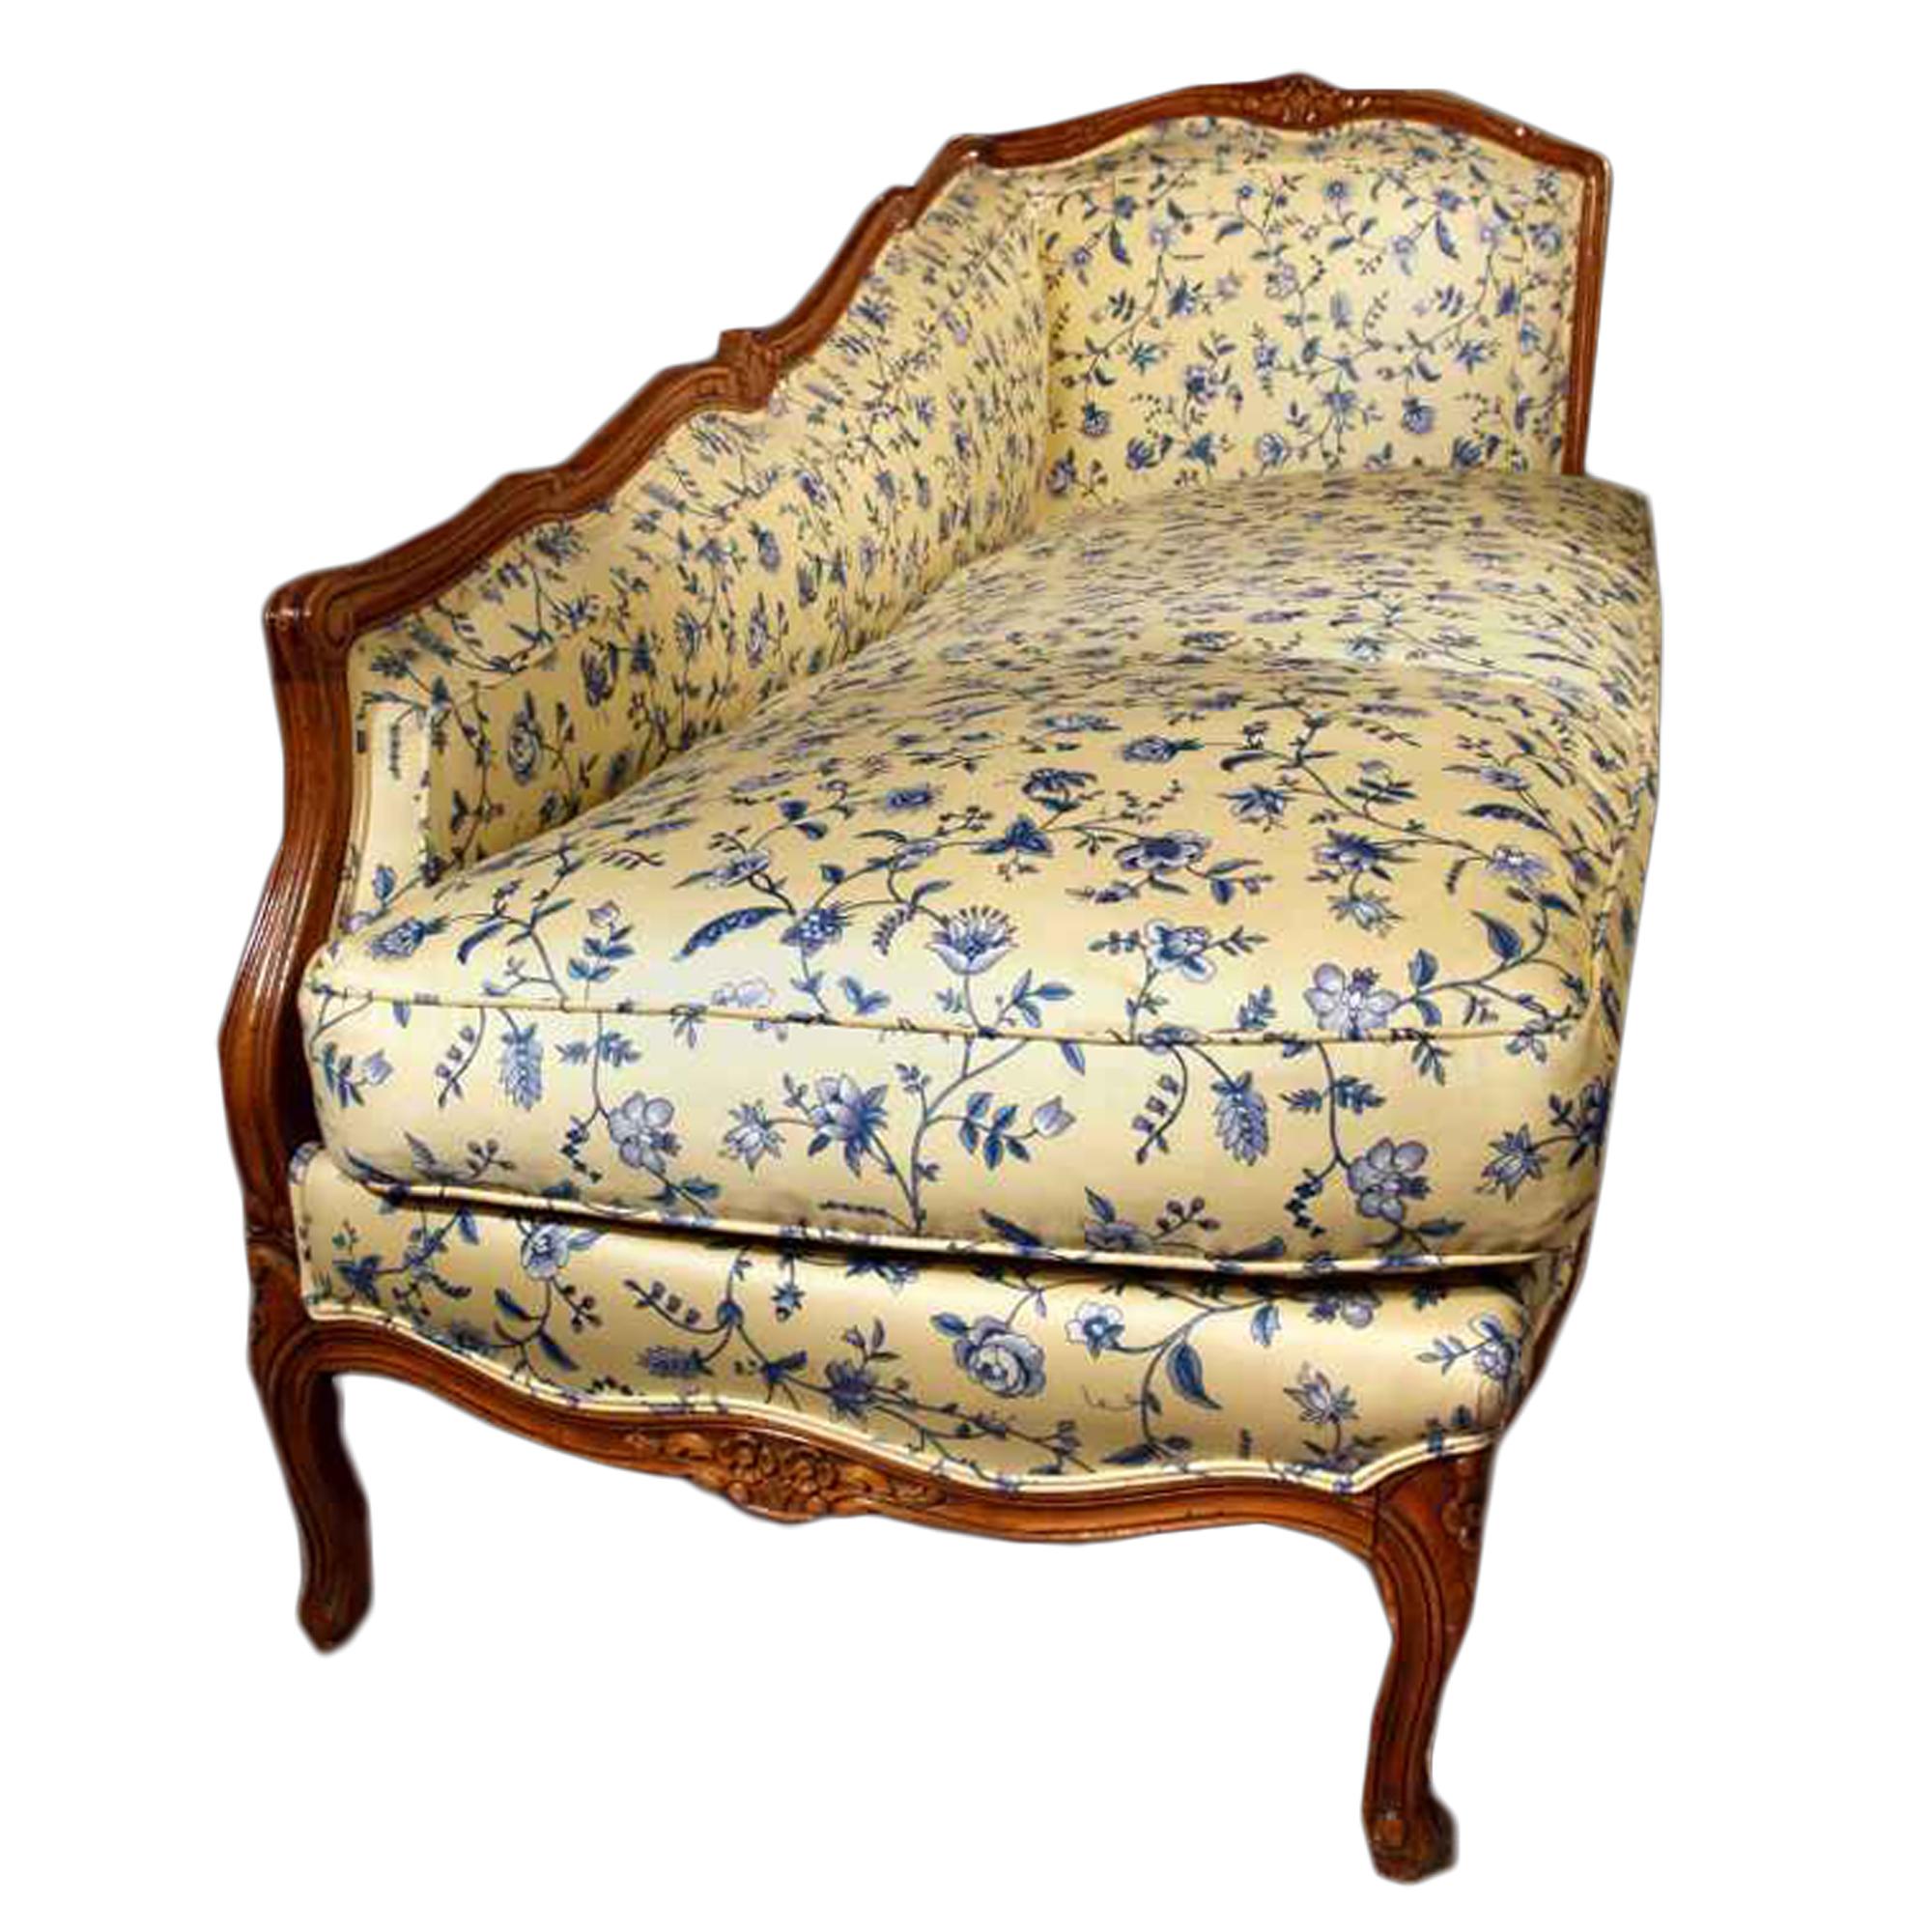 An elegant and unusual country French late 19th century Louis XVI st. honey colored oak lounge chair. Upholstered on all sides with a handsome blue and yellow fabric. Raised on six 's' scrolled supports, the lounge chair has a scalloped moulded